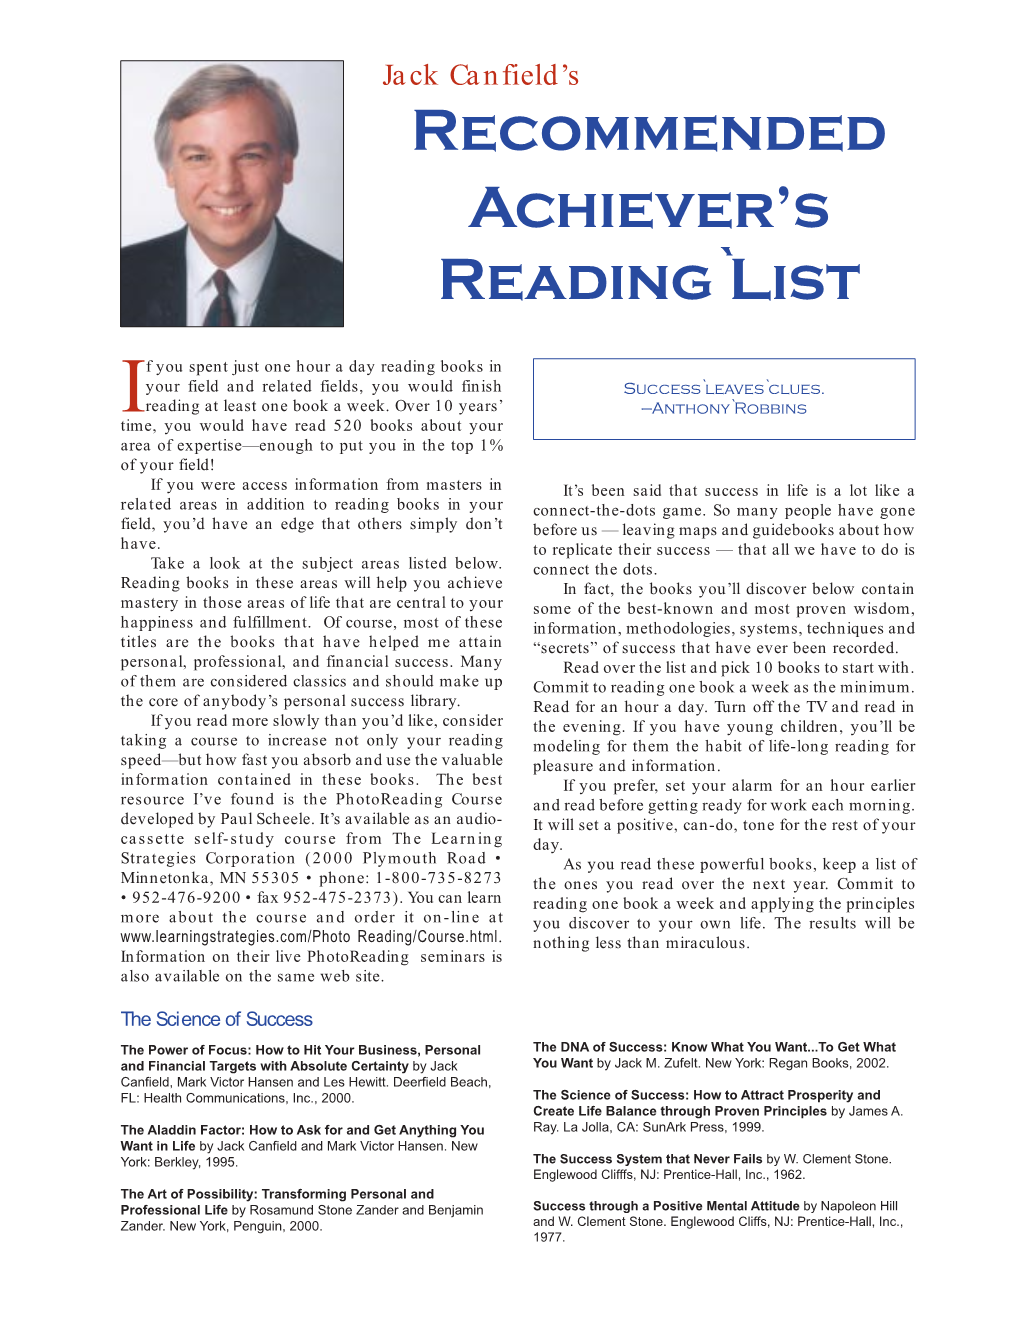 Recommended Achiever's Reading List